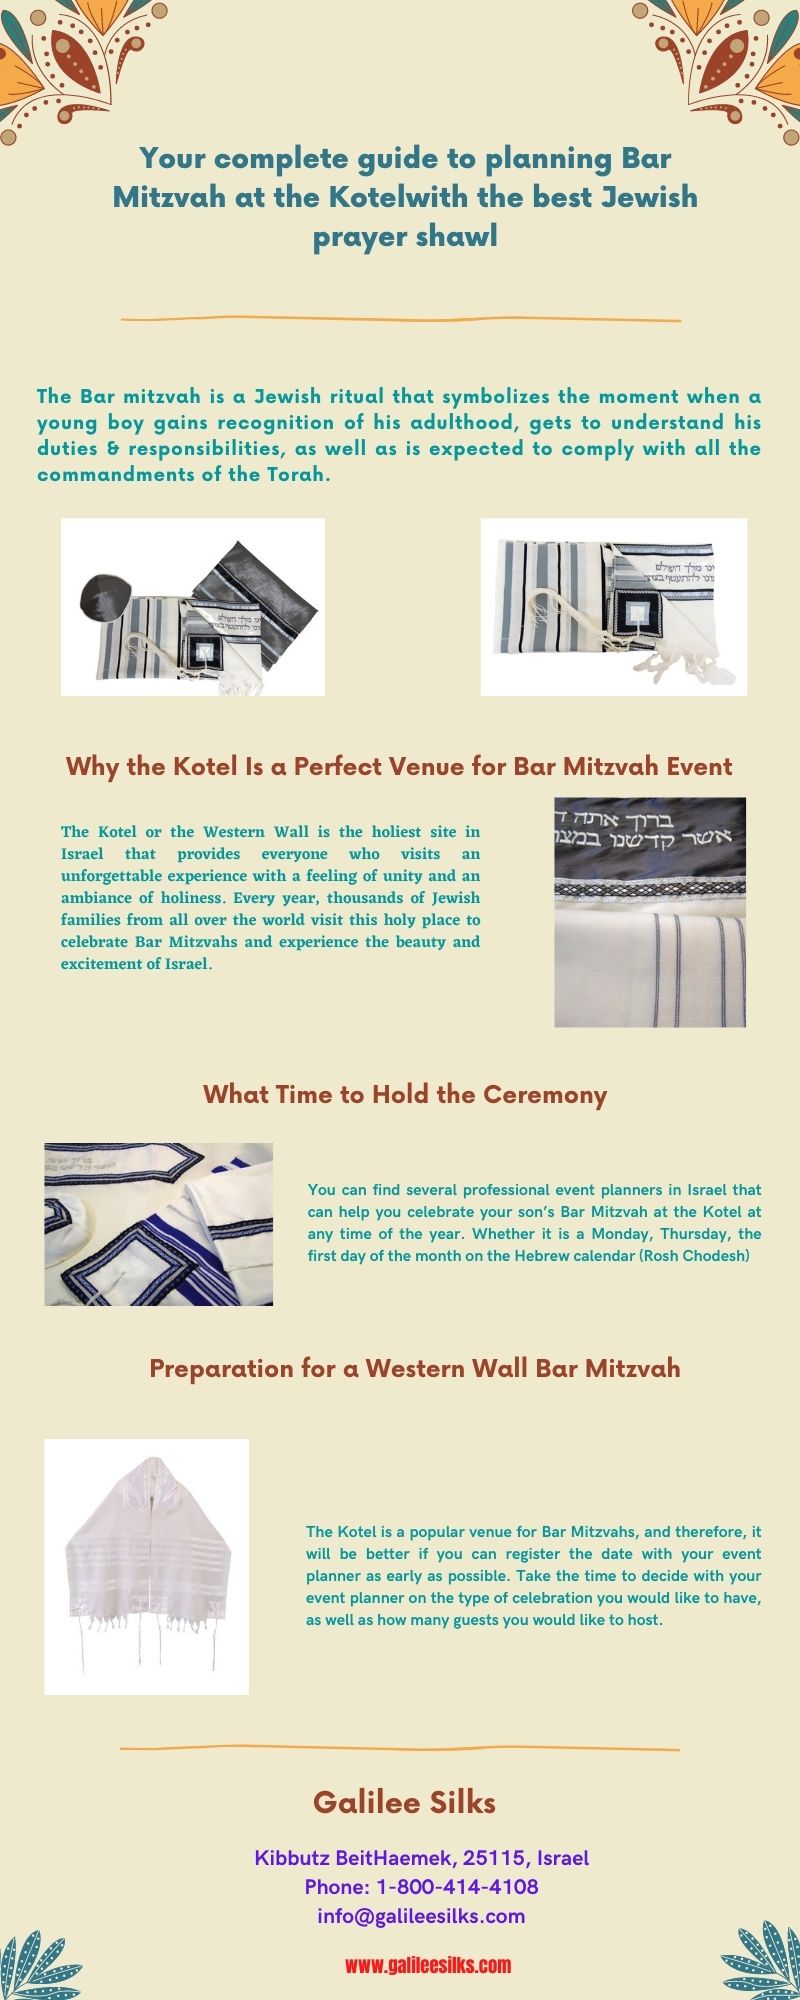 Your complete guide to planning Bar Mitzvah at the Kotel with the best Jewish prayer shawl Galilee Silks offers a vast collection of Jewish prayer shawls at an affordable price to celebrate the Bar Mitzvah event at the Kotel. For more details, visit: https://www.galileesilks.com/collections/classic-tallit-for-men by amramrafi